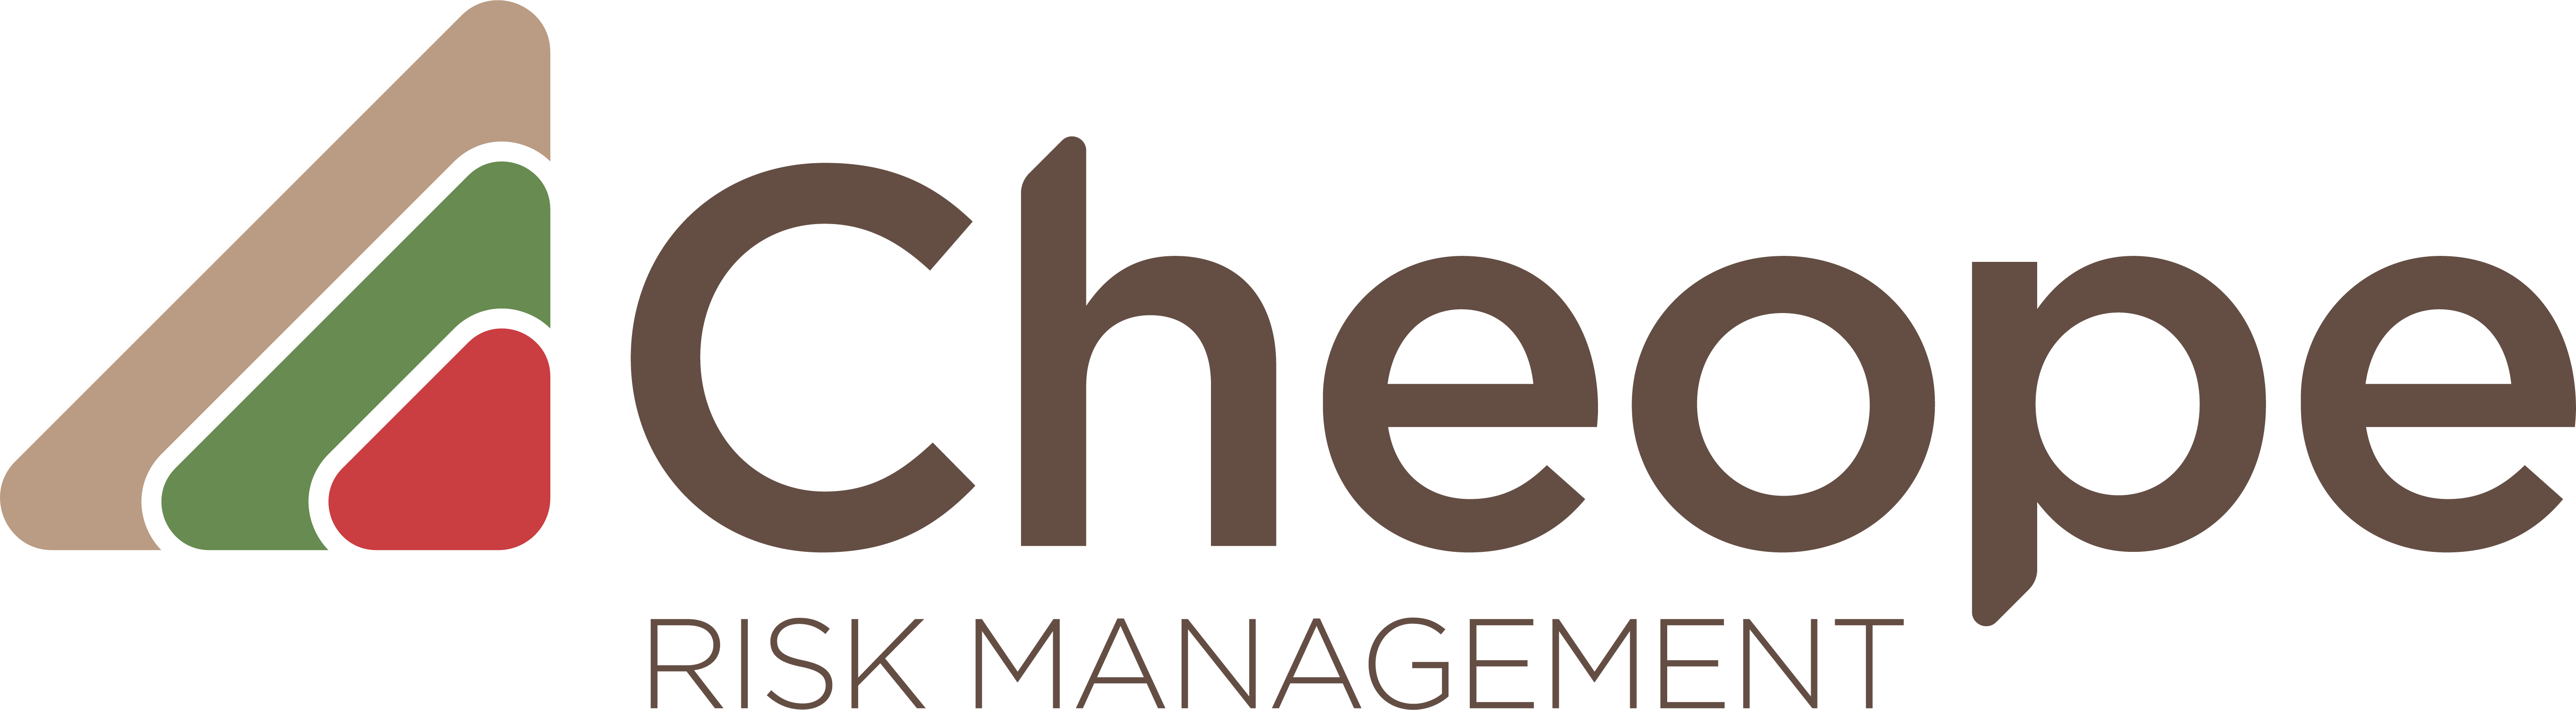 CHEOPE RISK MANAGEMENT